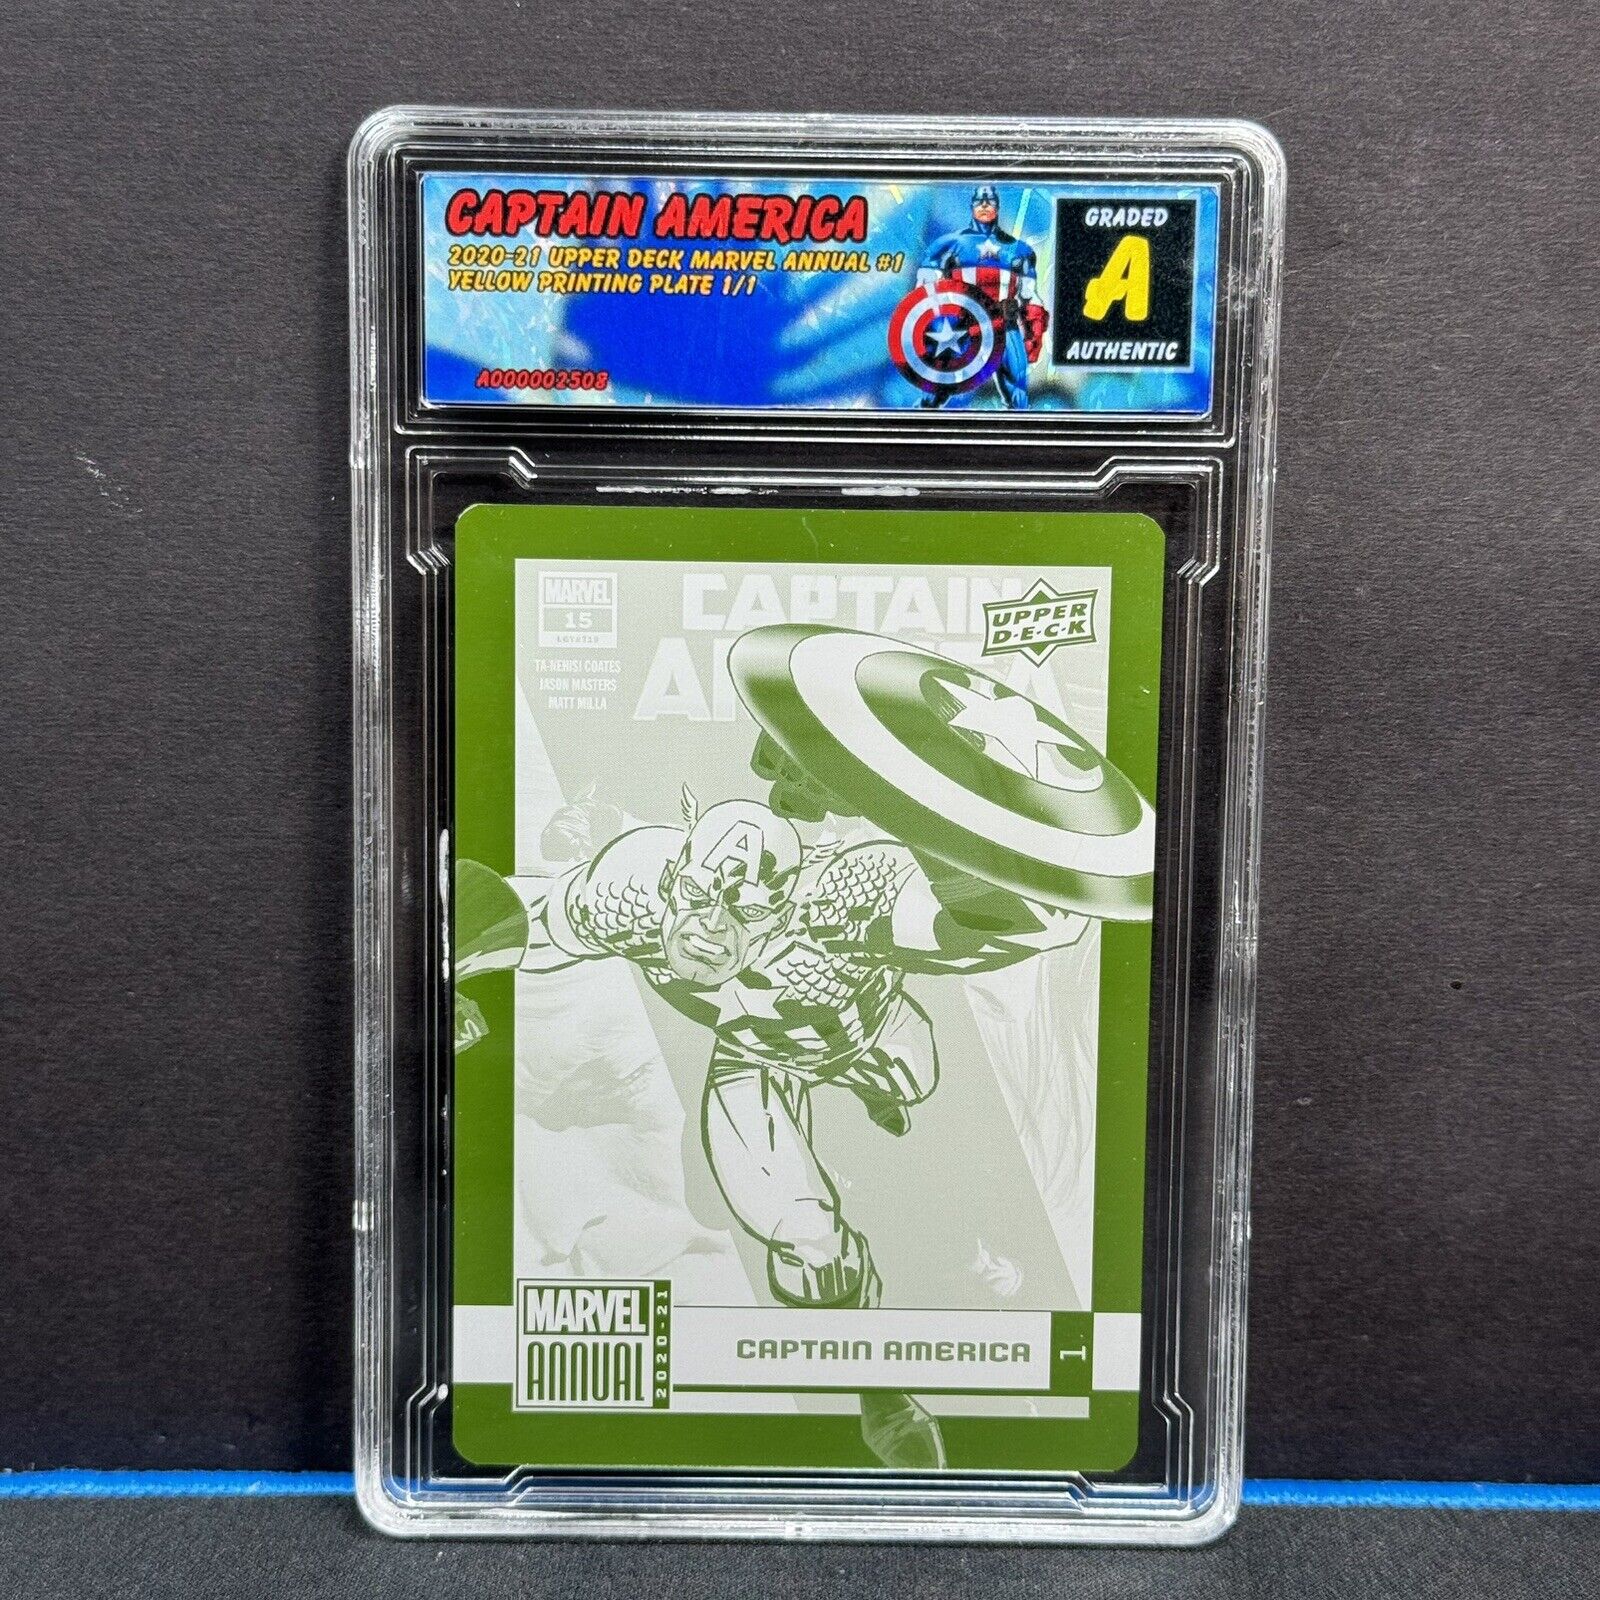 2020-21 Upper Deck Marvel Annual Captain America Printing Plate 1/1 Authentic 